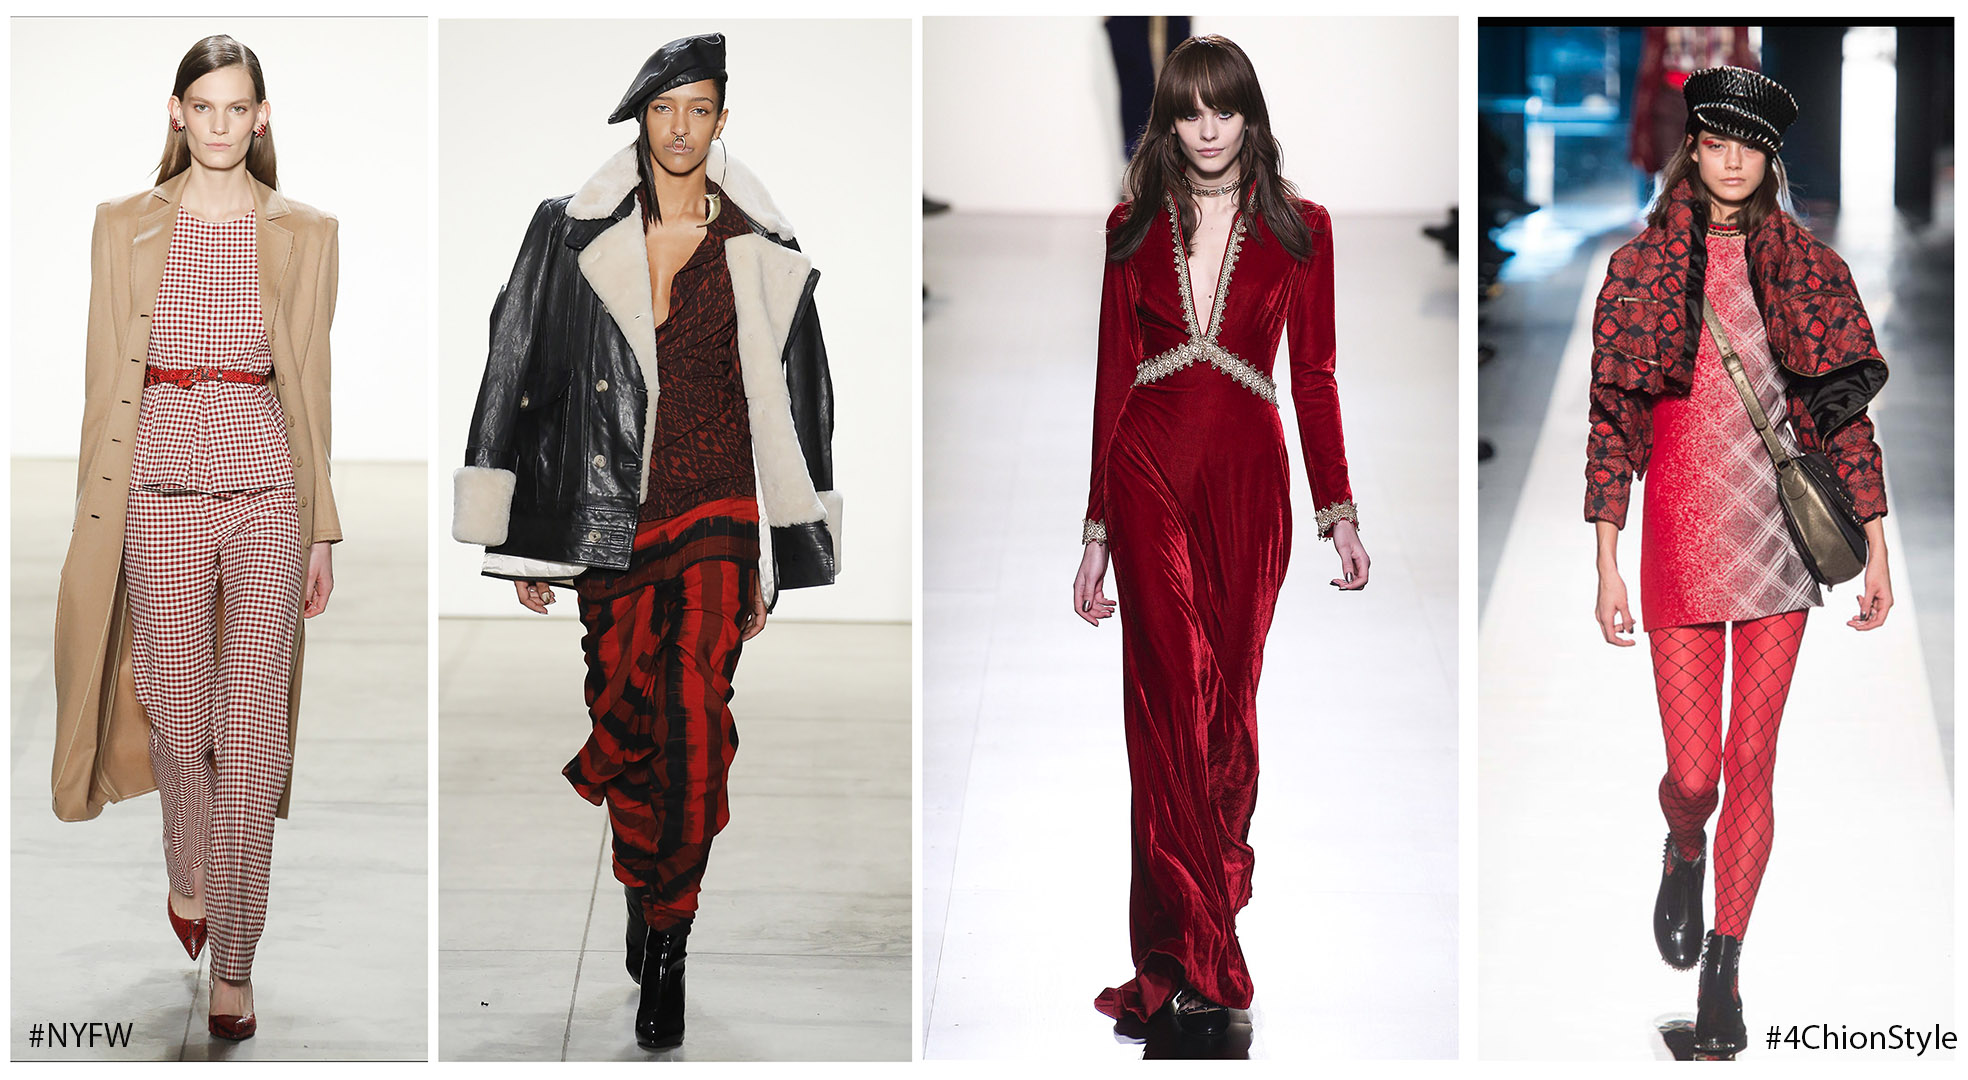 nyfw-new-york-fashion-day-1-4chion-lifestyle-red